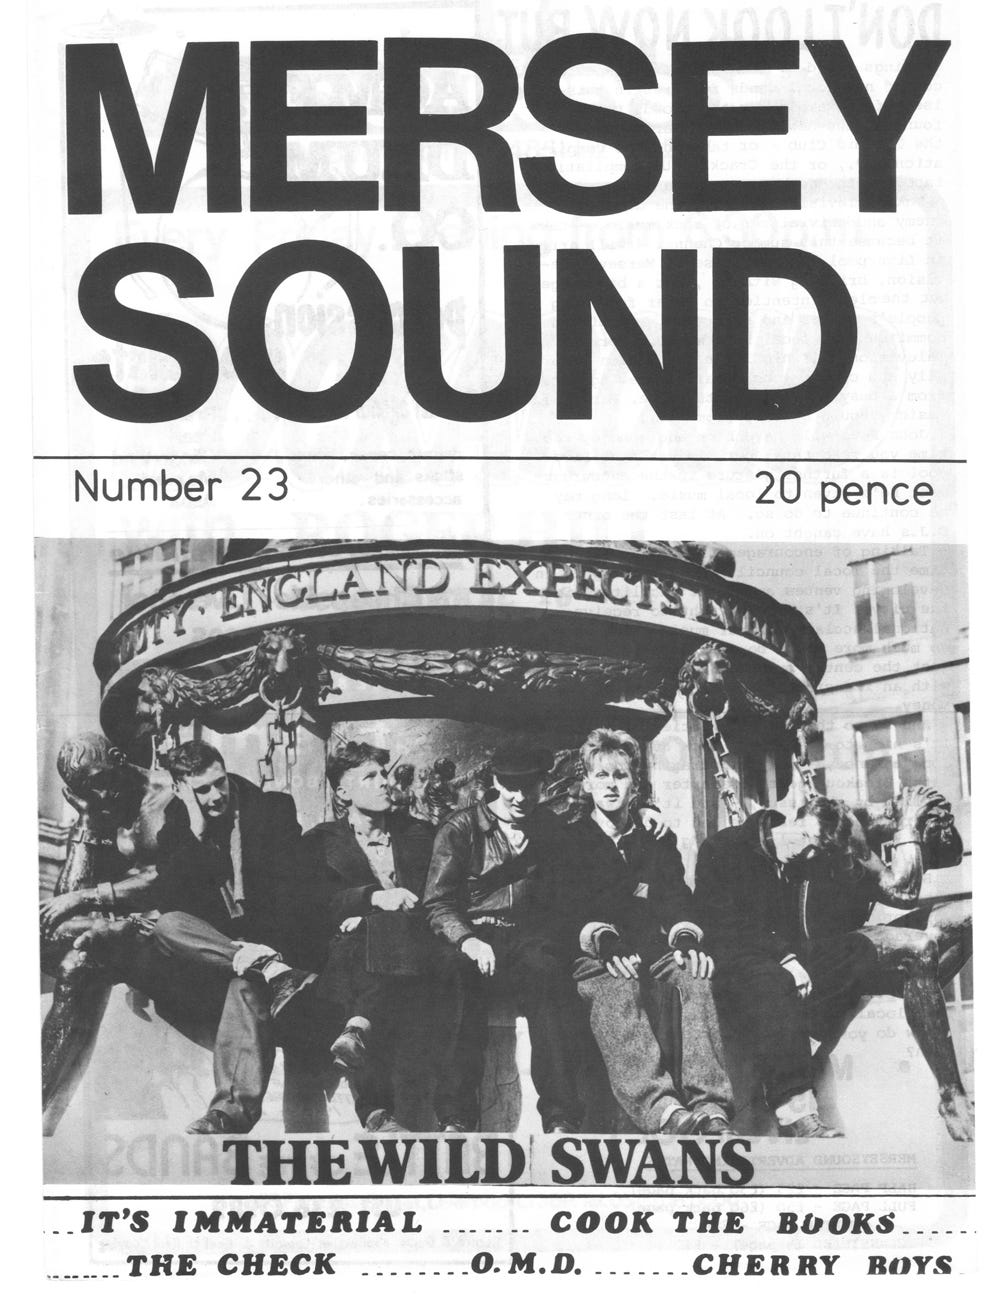 The Merseysound cover, with a photo of the Wild Swans. The contents list includes It's Immaterial, Cook The Books, The Check, OMD and Cherry Boys. The magazine costs 20 pence.